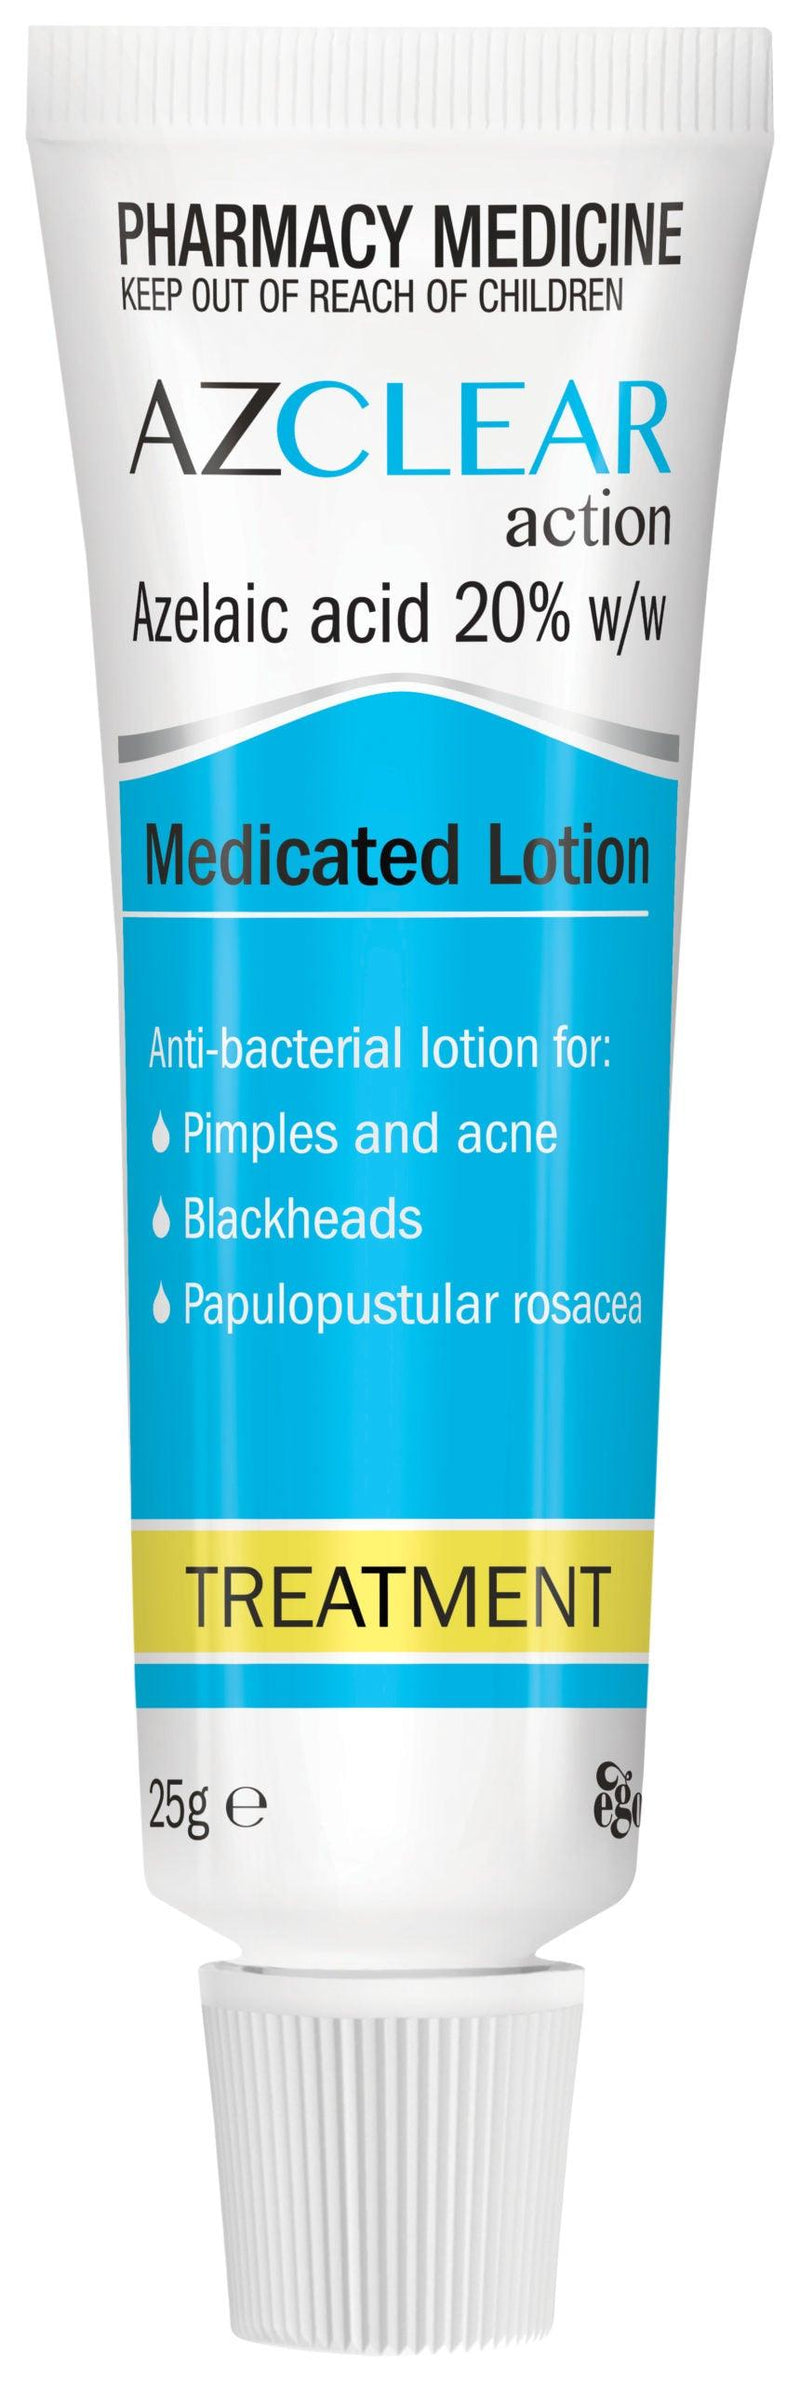 Azclear Action Medication Lotion 25g - Aussie Pharmacy